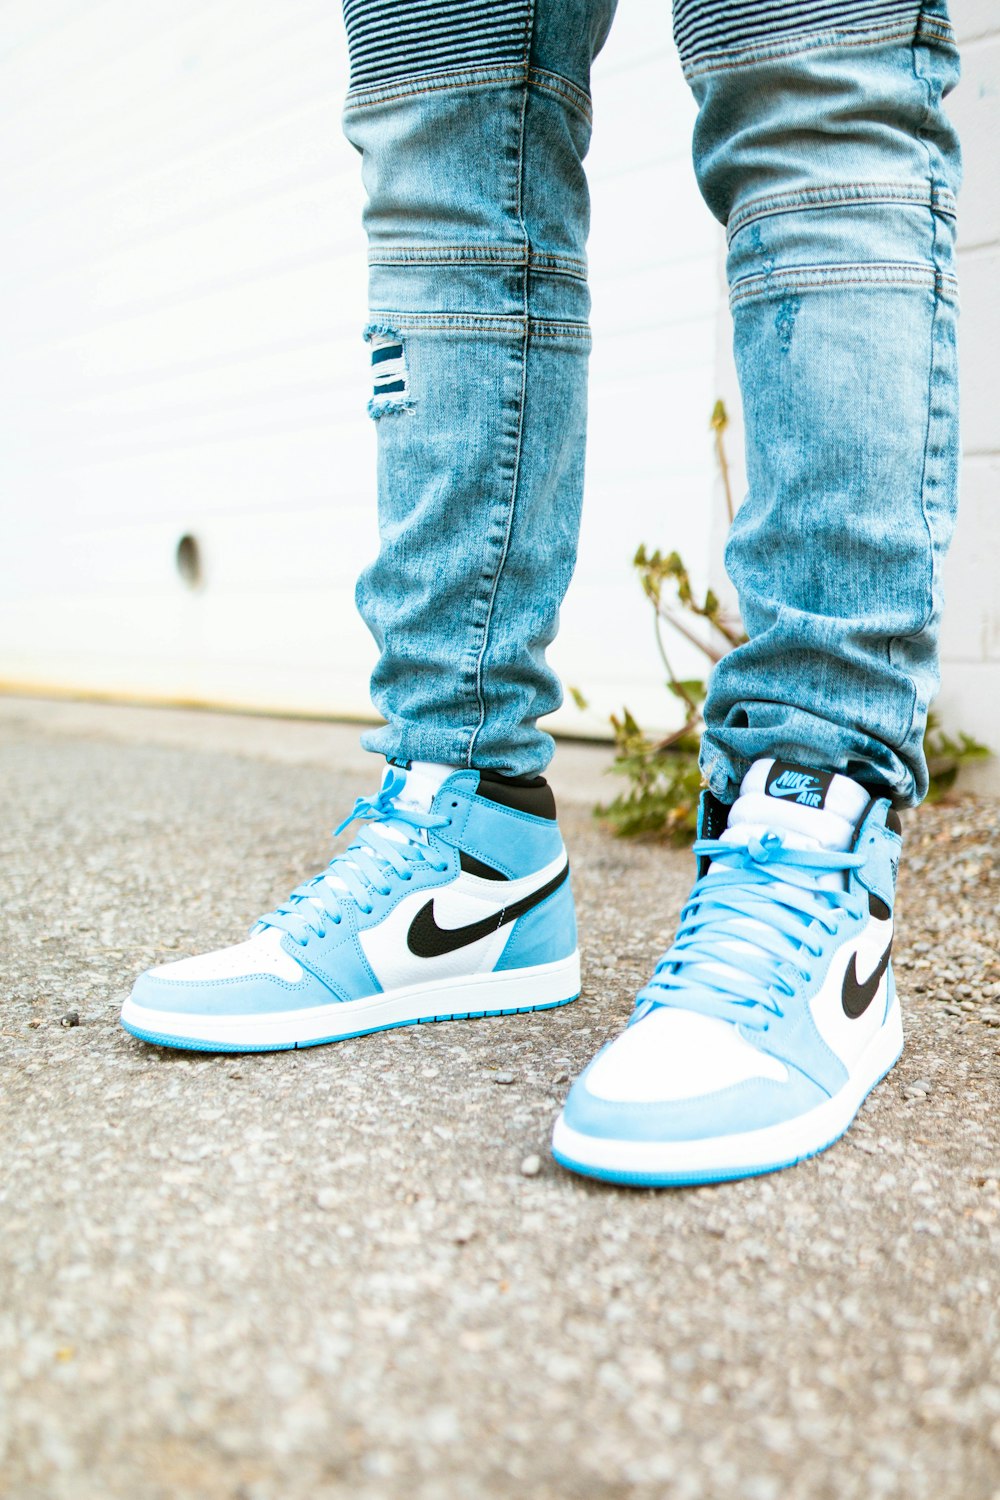 Person in blue denim jeans and and white nike sneakers photo – Free Shoe Image on Unsplash